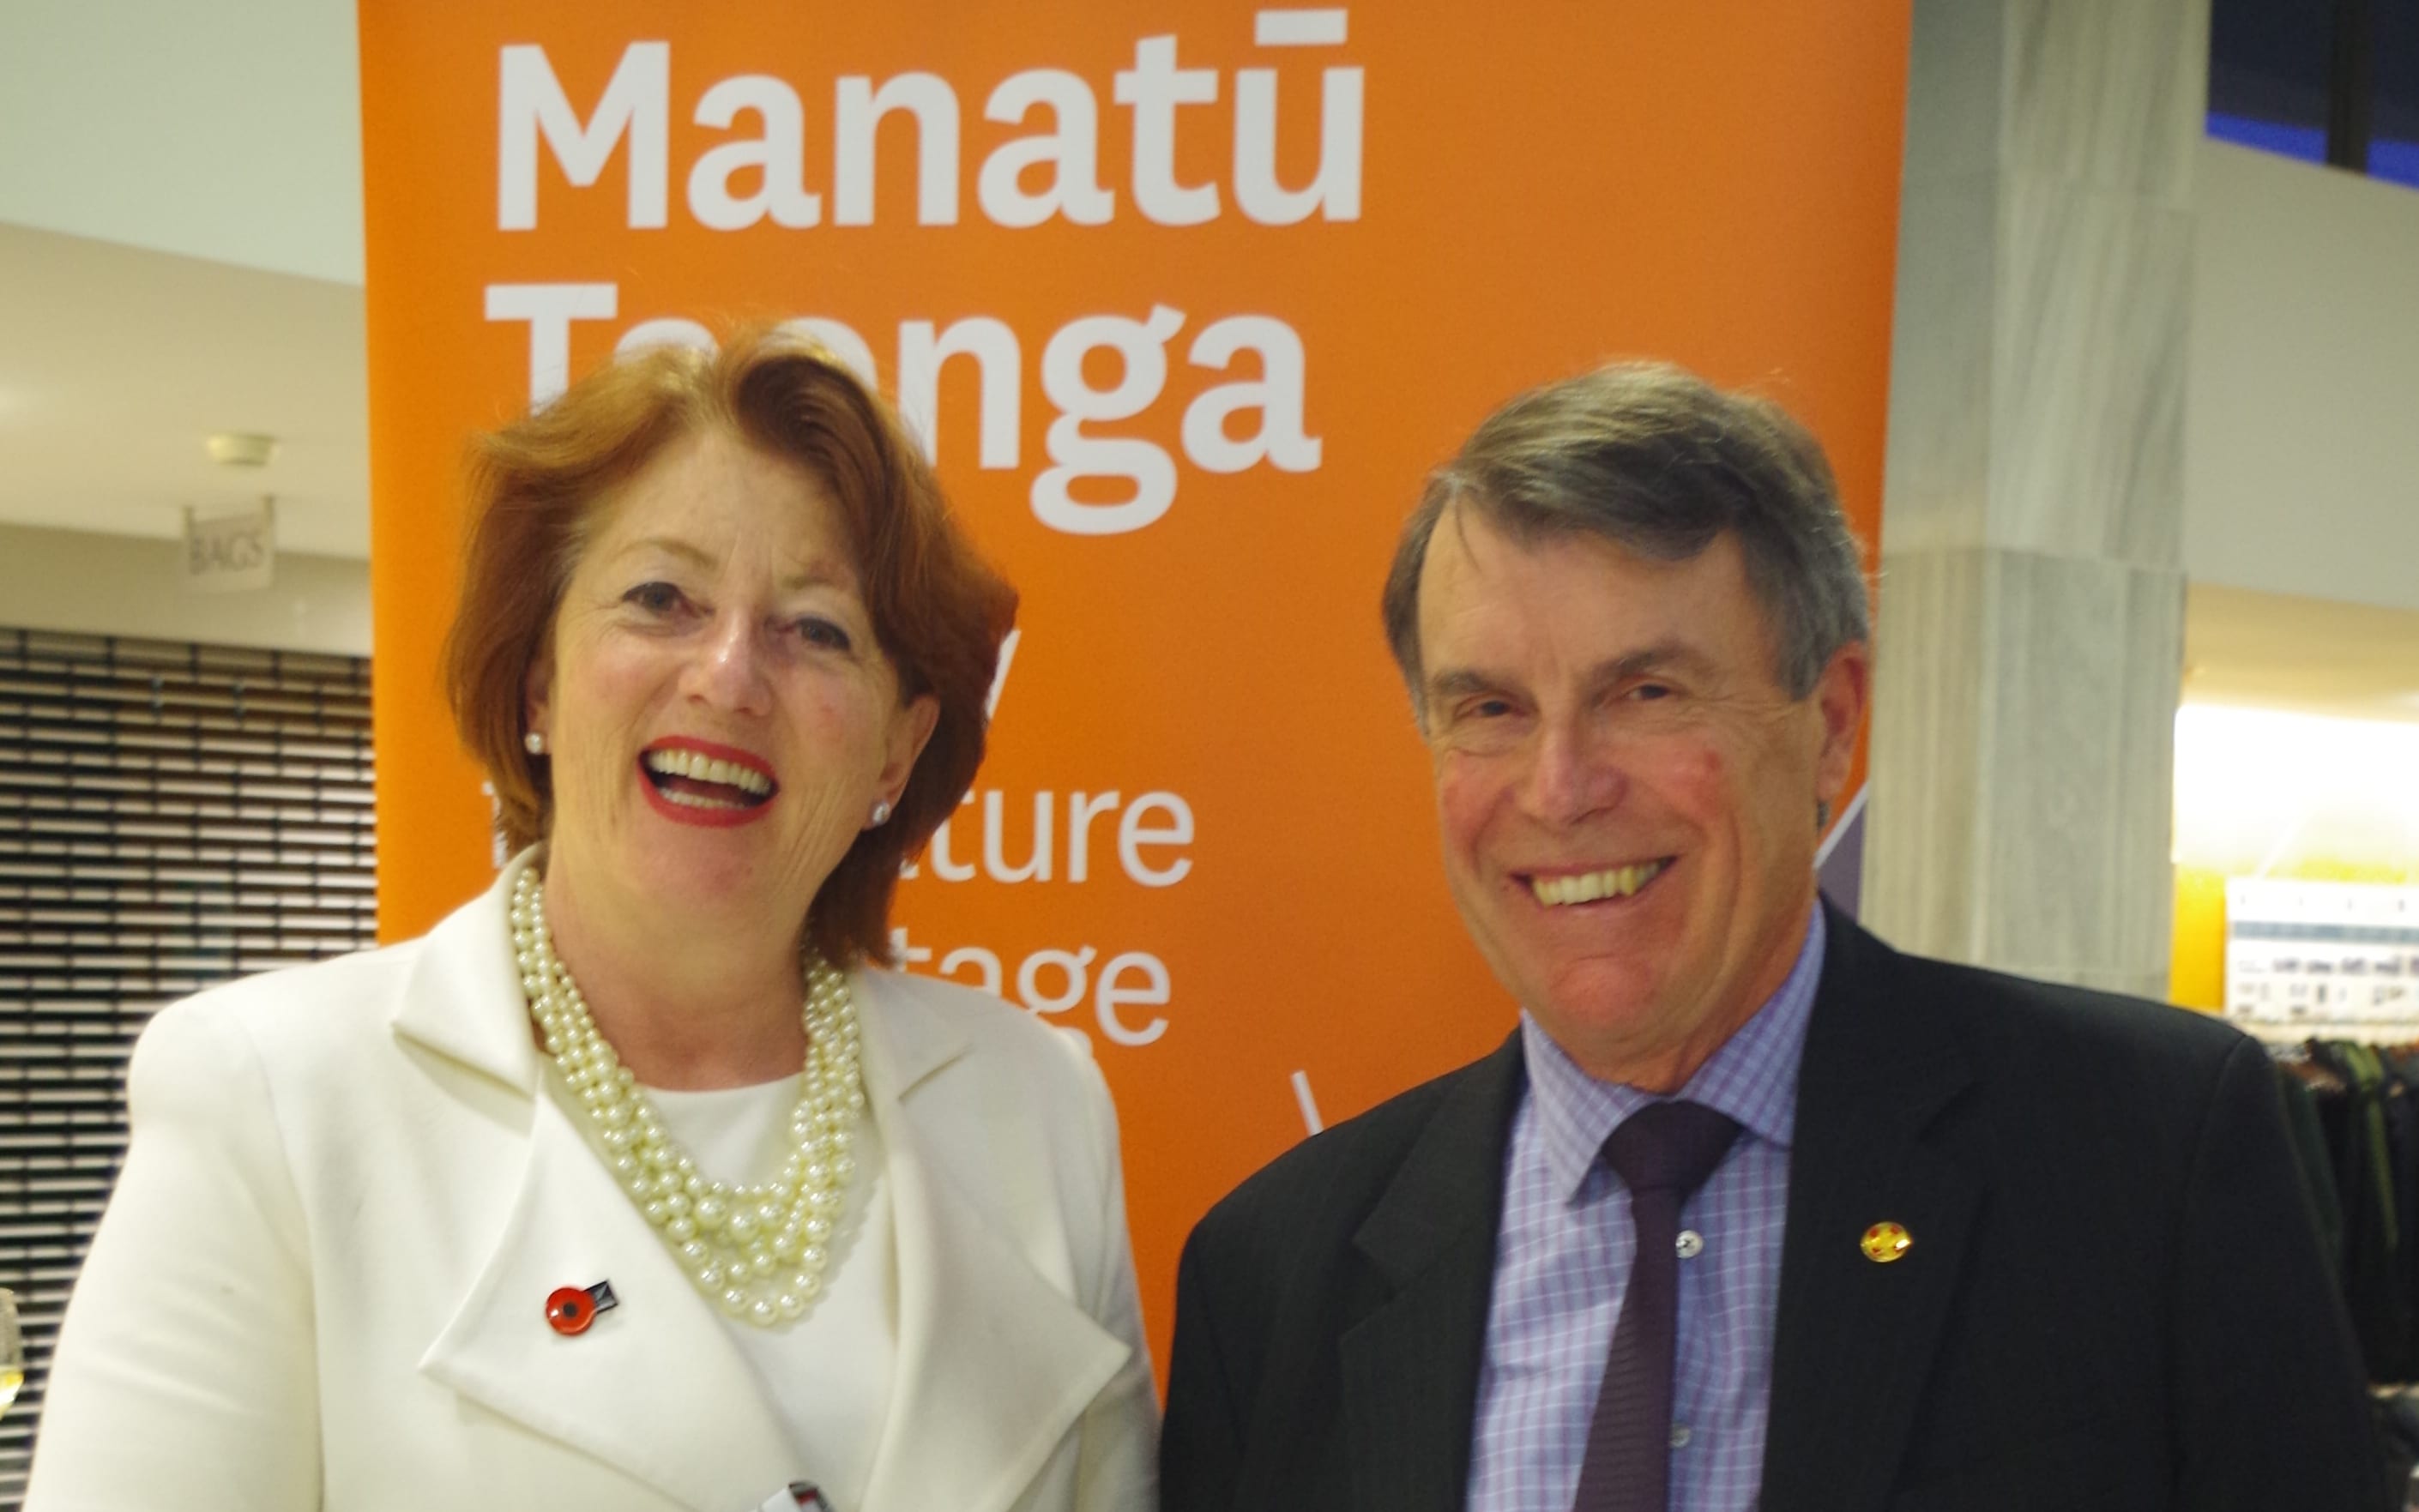 The Hon. Maggie Barry and Ian McGibbon